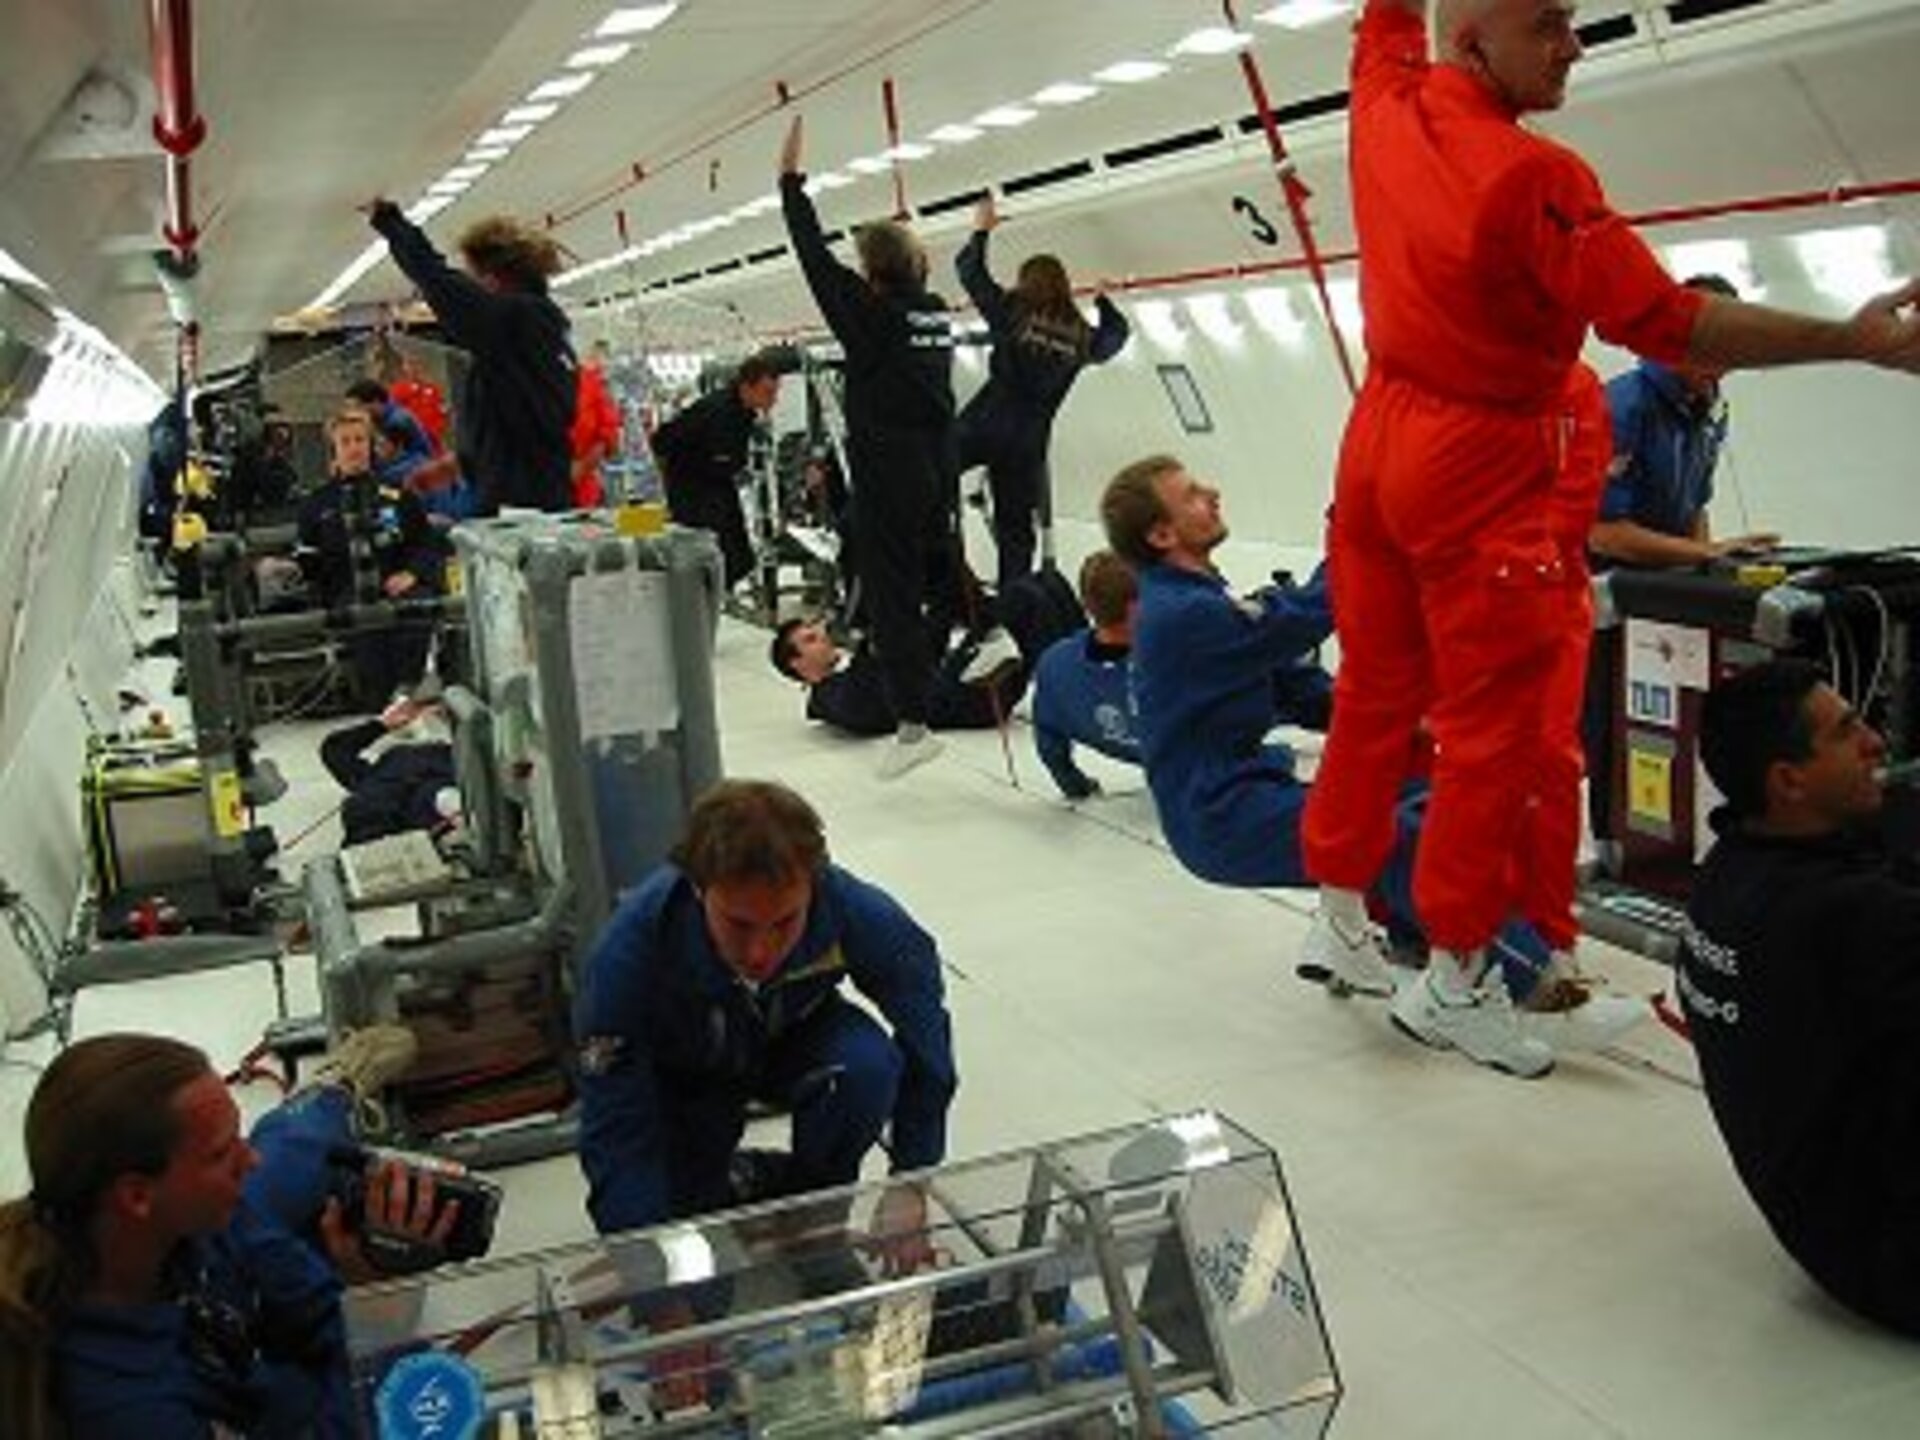 Weightlessness during a parabolic flight